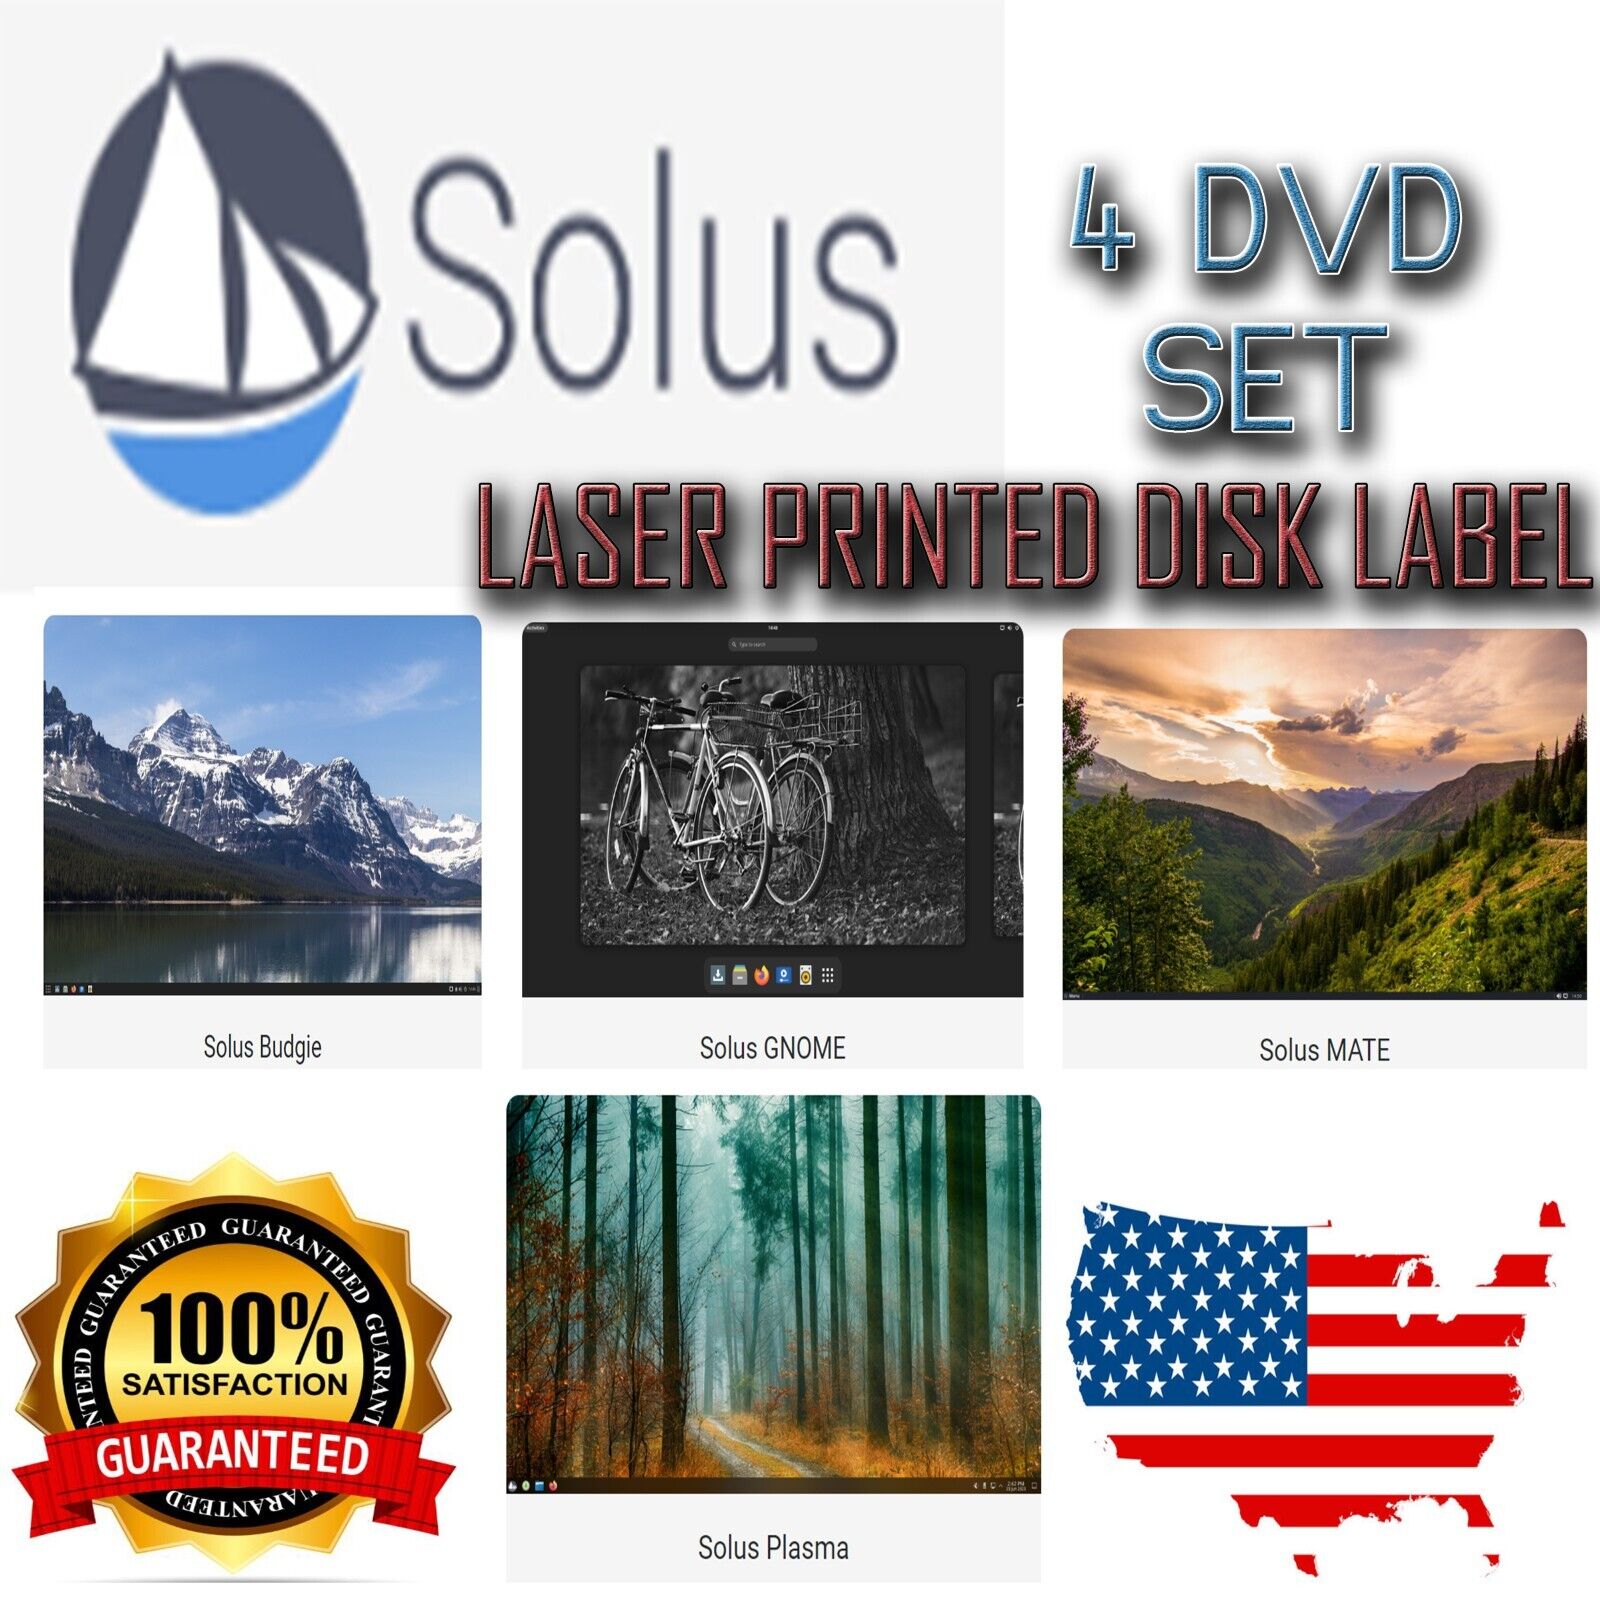 Solus 4.3 Linux Operating System 4 DVD Set | Fast Shipping from the USA